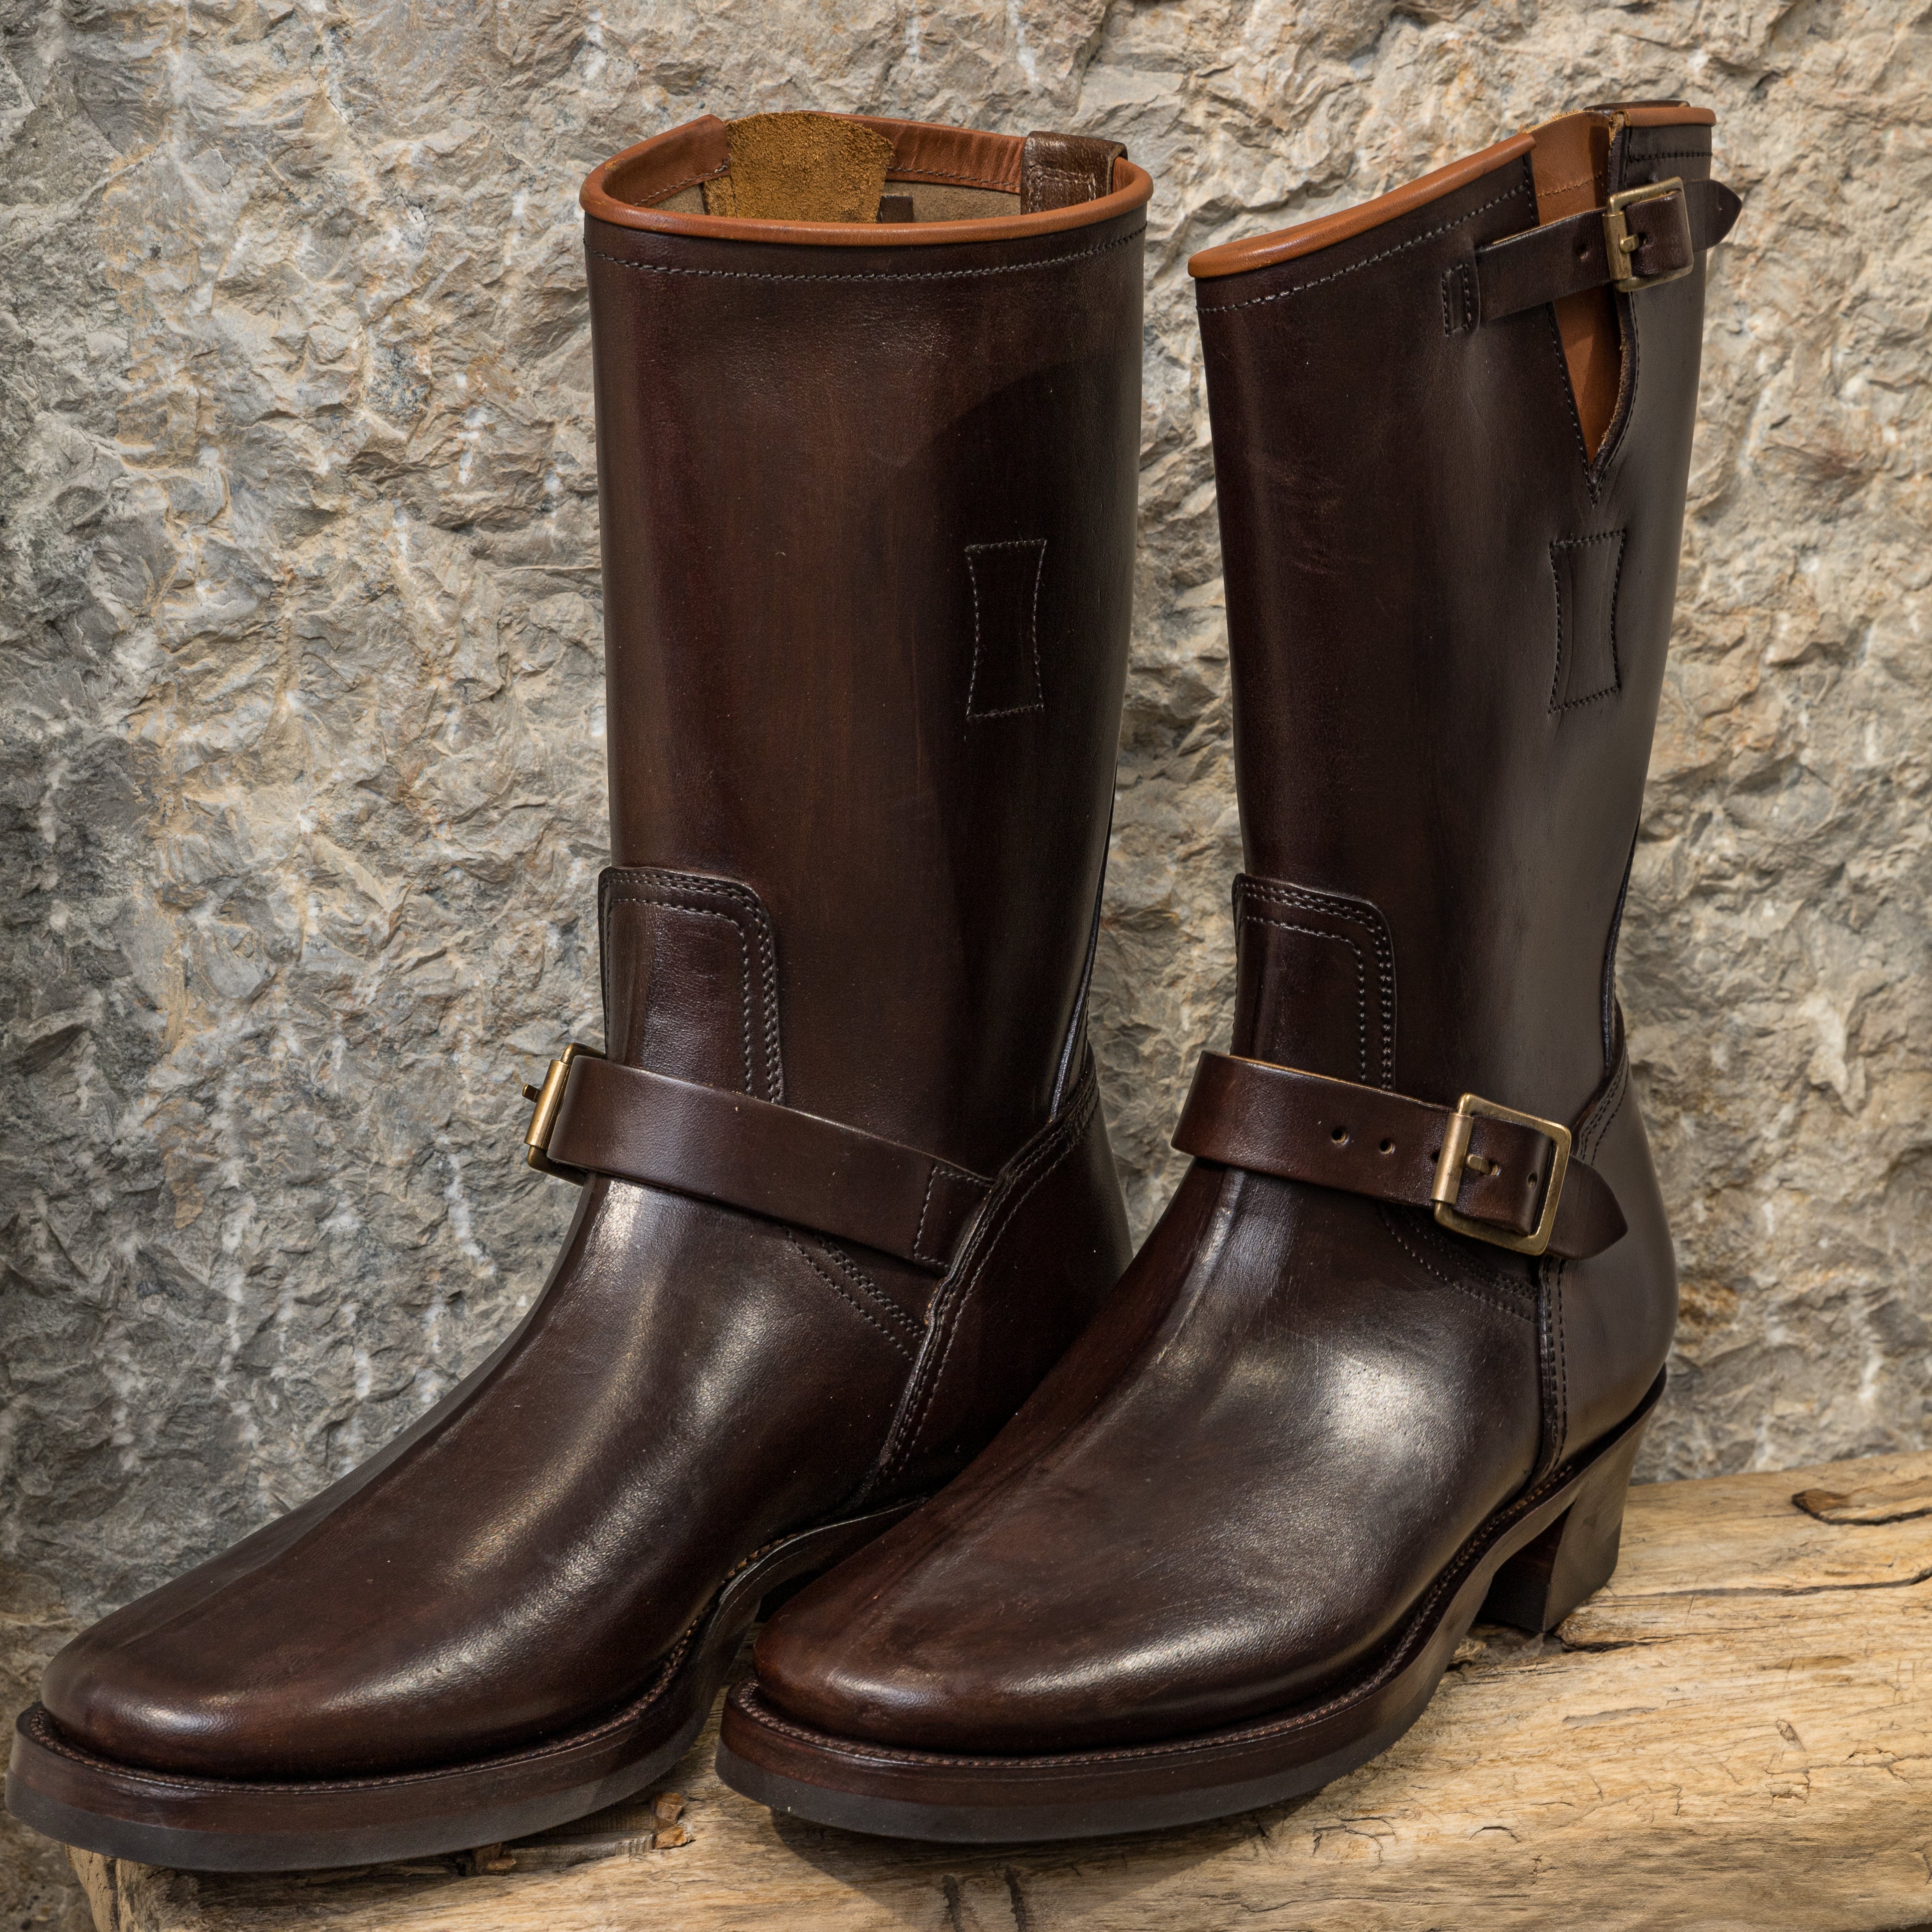 Clinch Boots | Recall Clothing